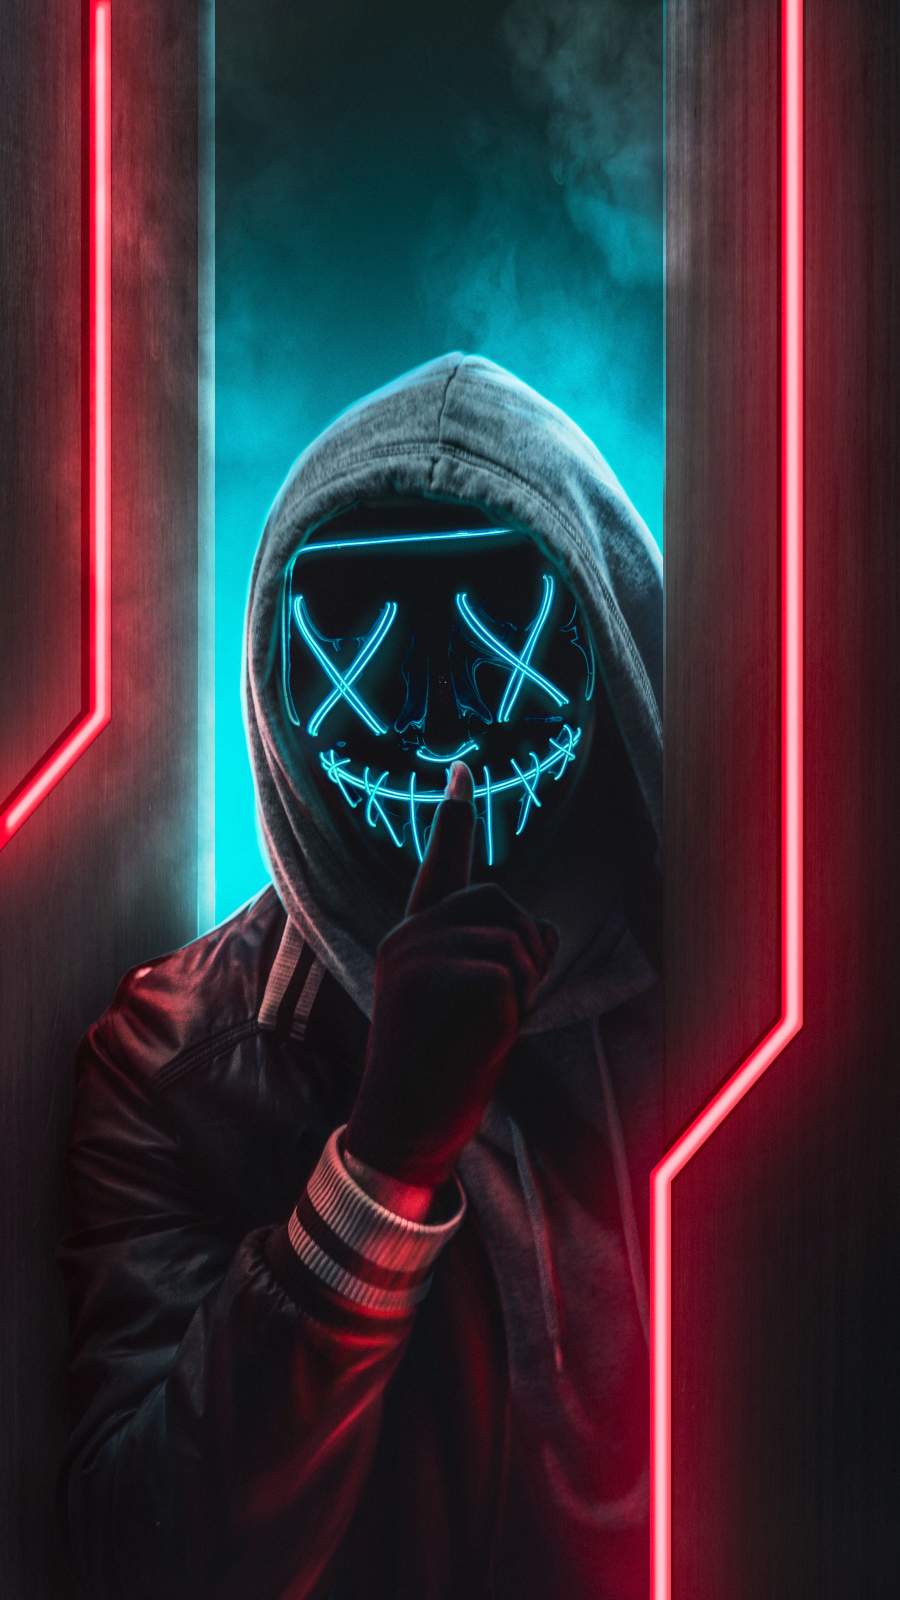 Anonymous Mask Hoodie Guy iPhone Wallpaper Wallpaper, iPhone Wallpaper